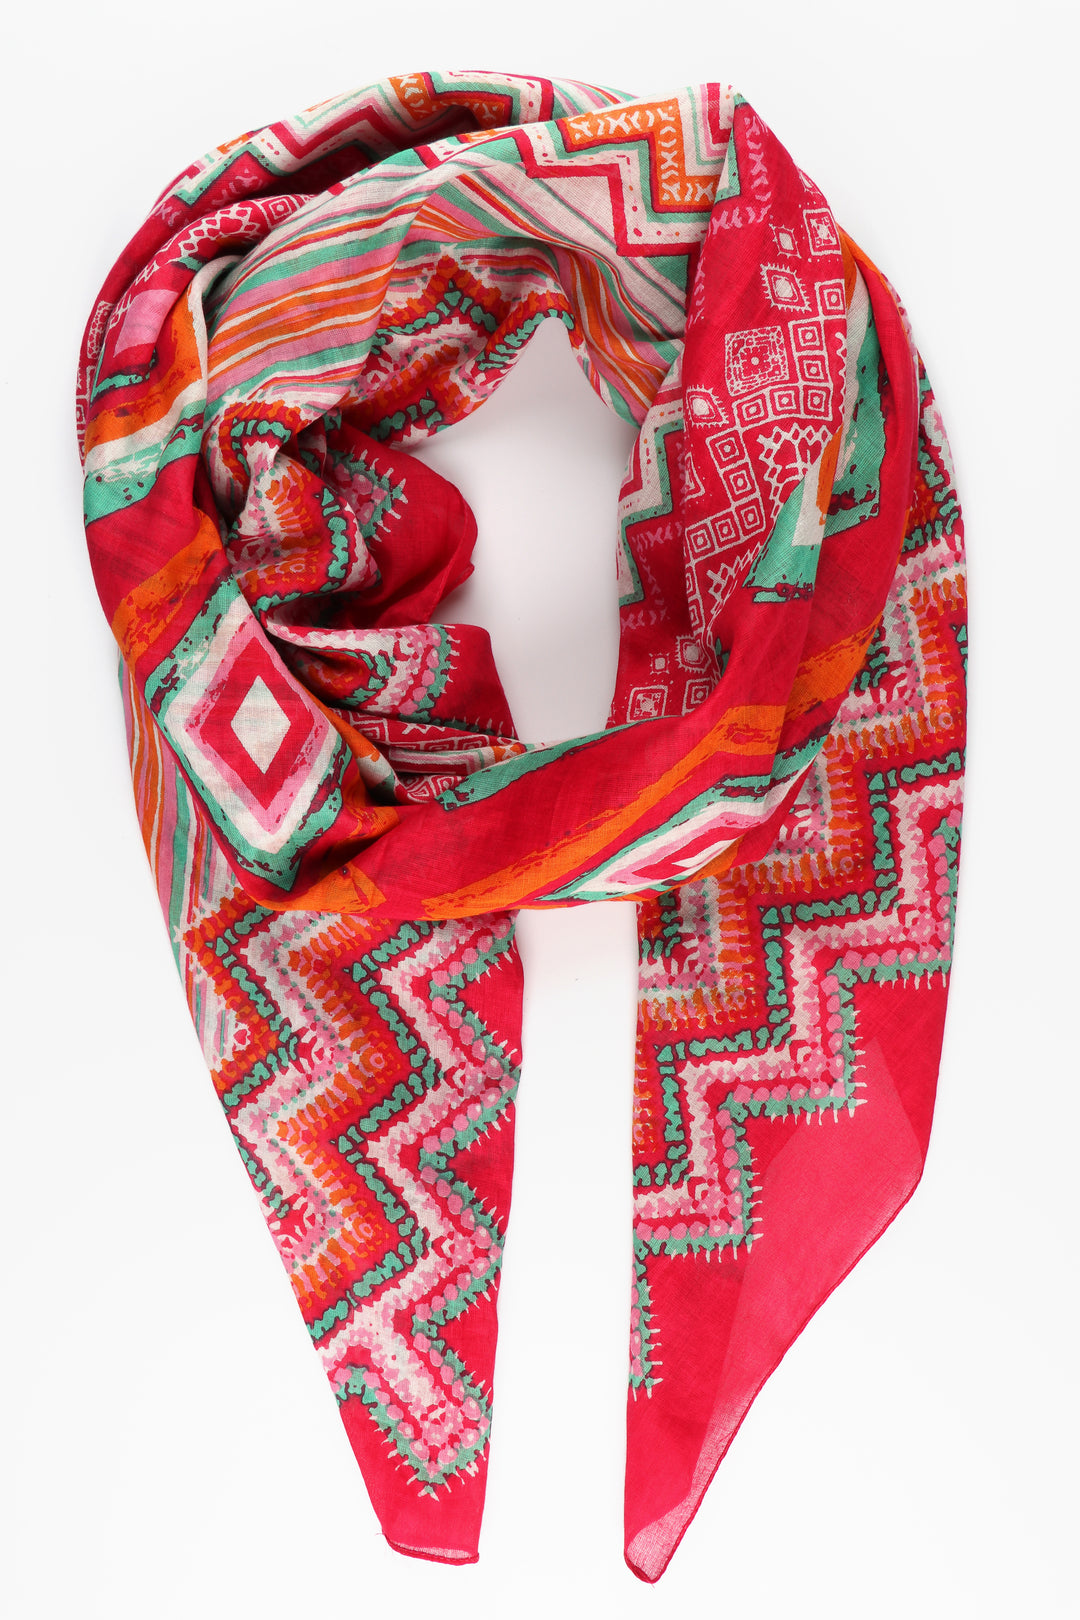 pink cotton scarf with geometric ikat diamond shaped patterns and zig zag lines in green